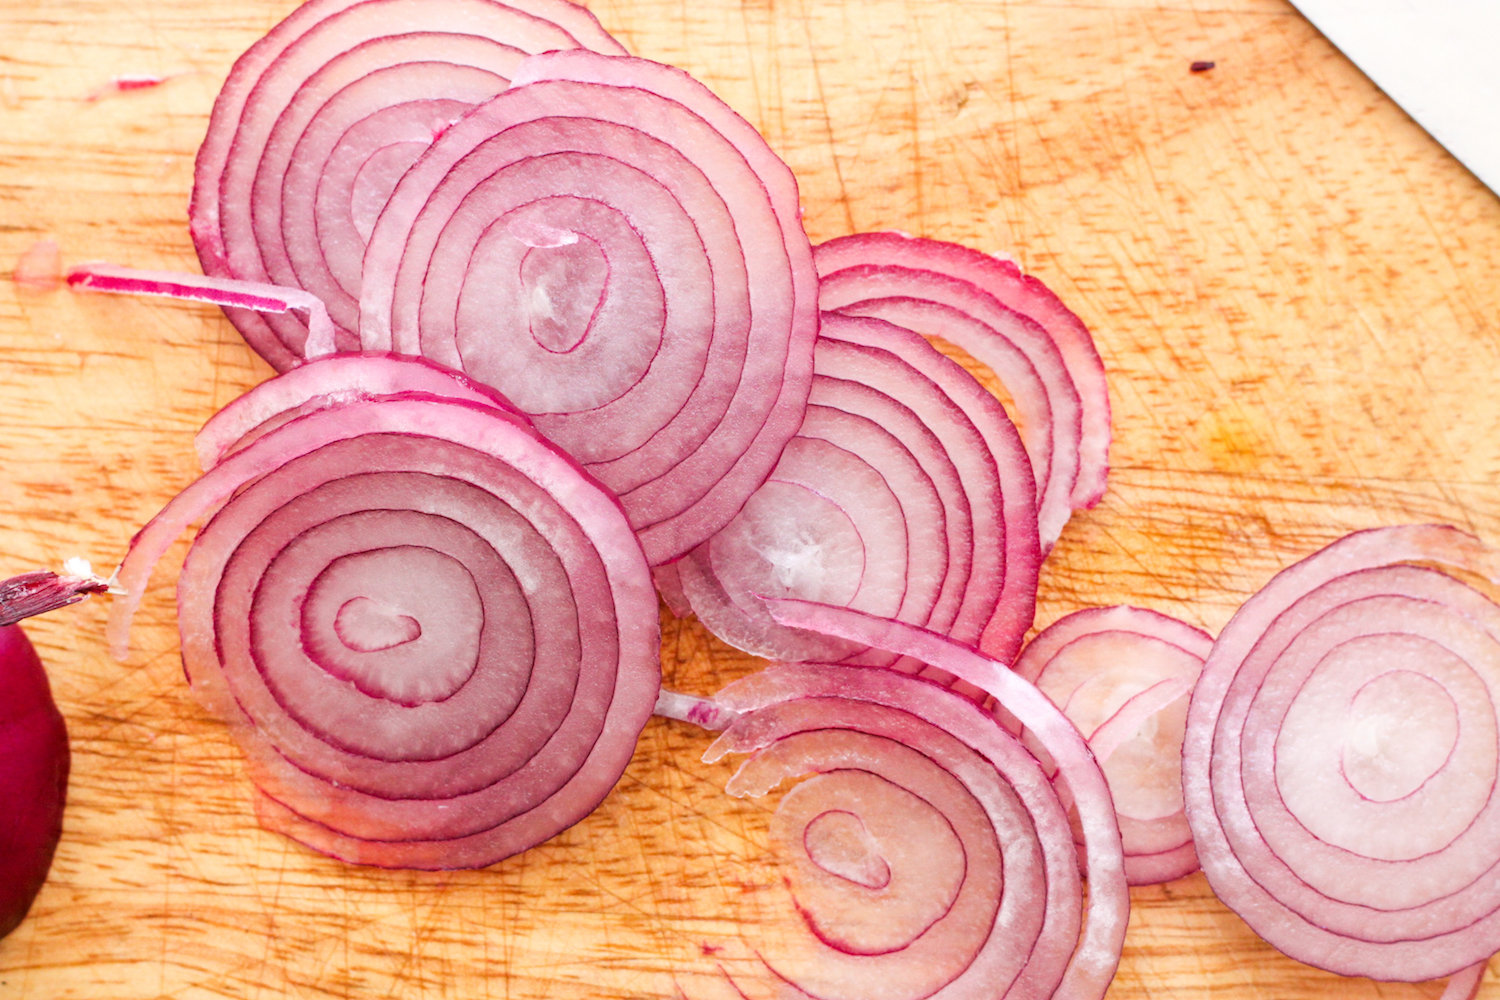 Sliced red onions (Eat Me. Drink Me.)